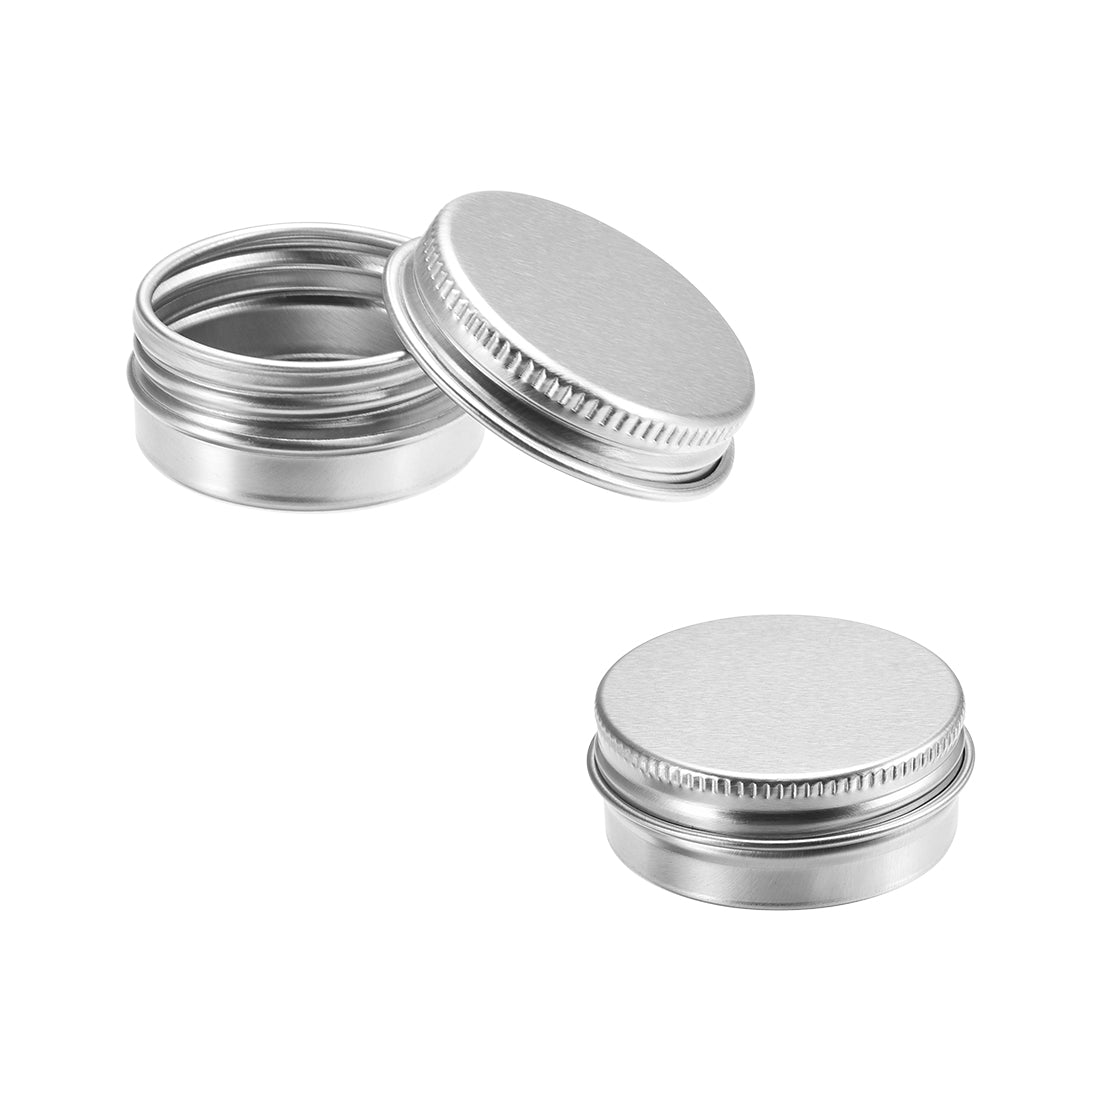 uxcell Uxcell 0.33 oz Round Aluminum Cans Tin Can Screw Top Metal Lid Containers 1ml, 3pcs